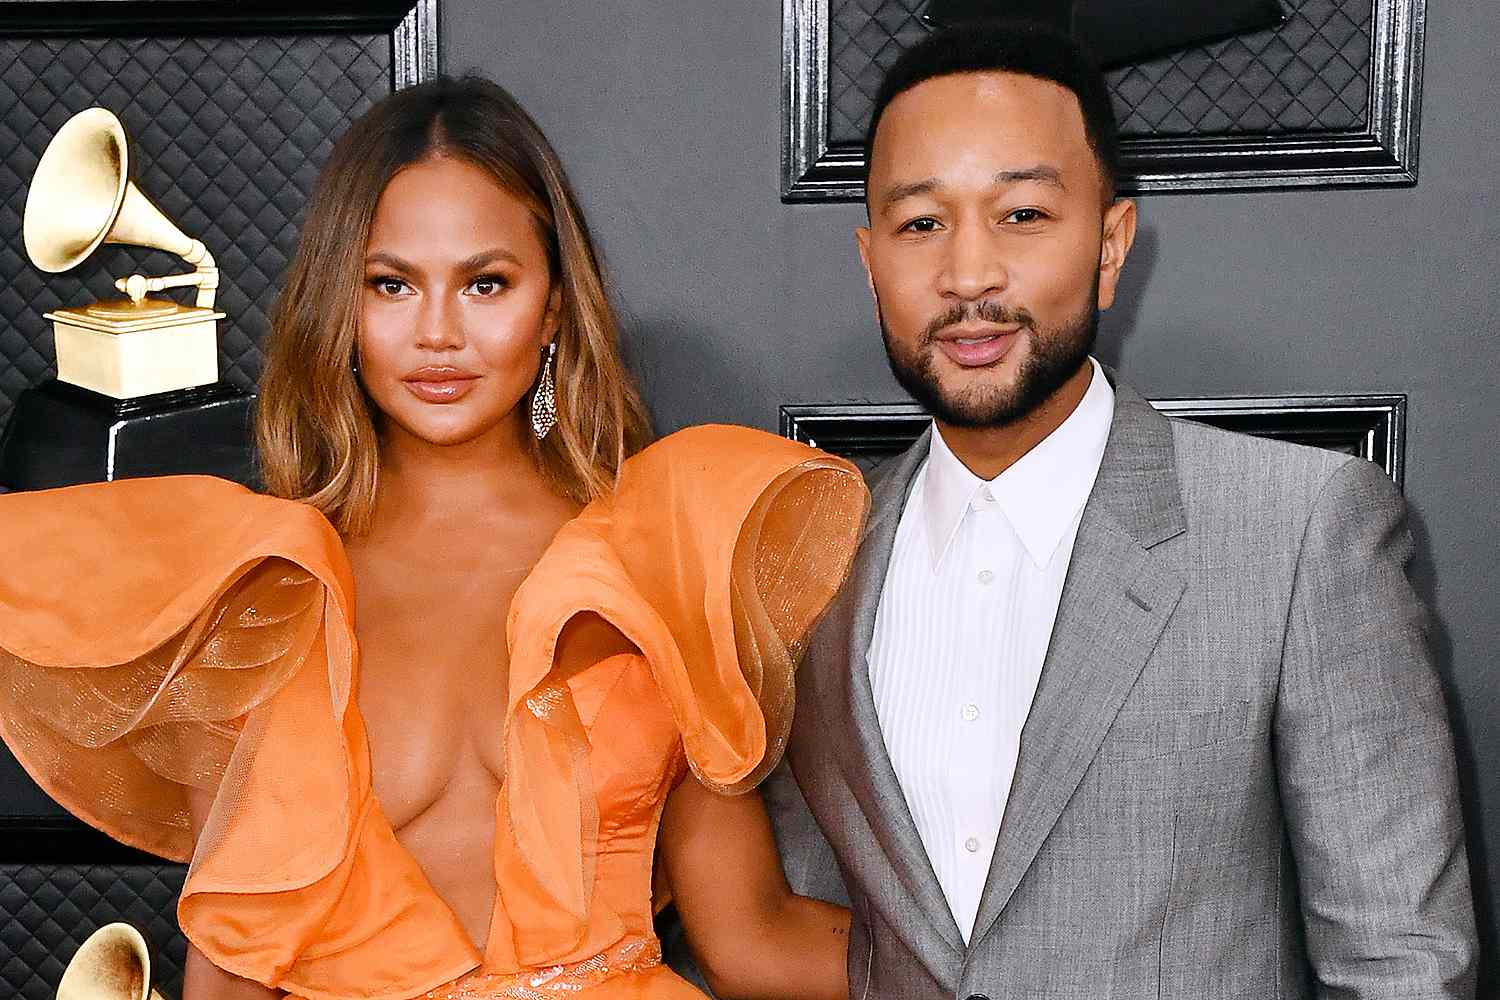 John Legend 'in Awe' of Wife Chrissy Teigen's 'Strength' After Dedicating BBMAs Performance to Her - msnNOW